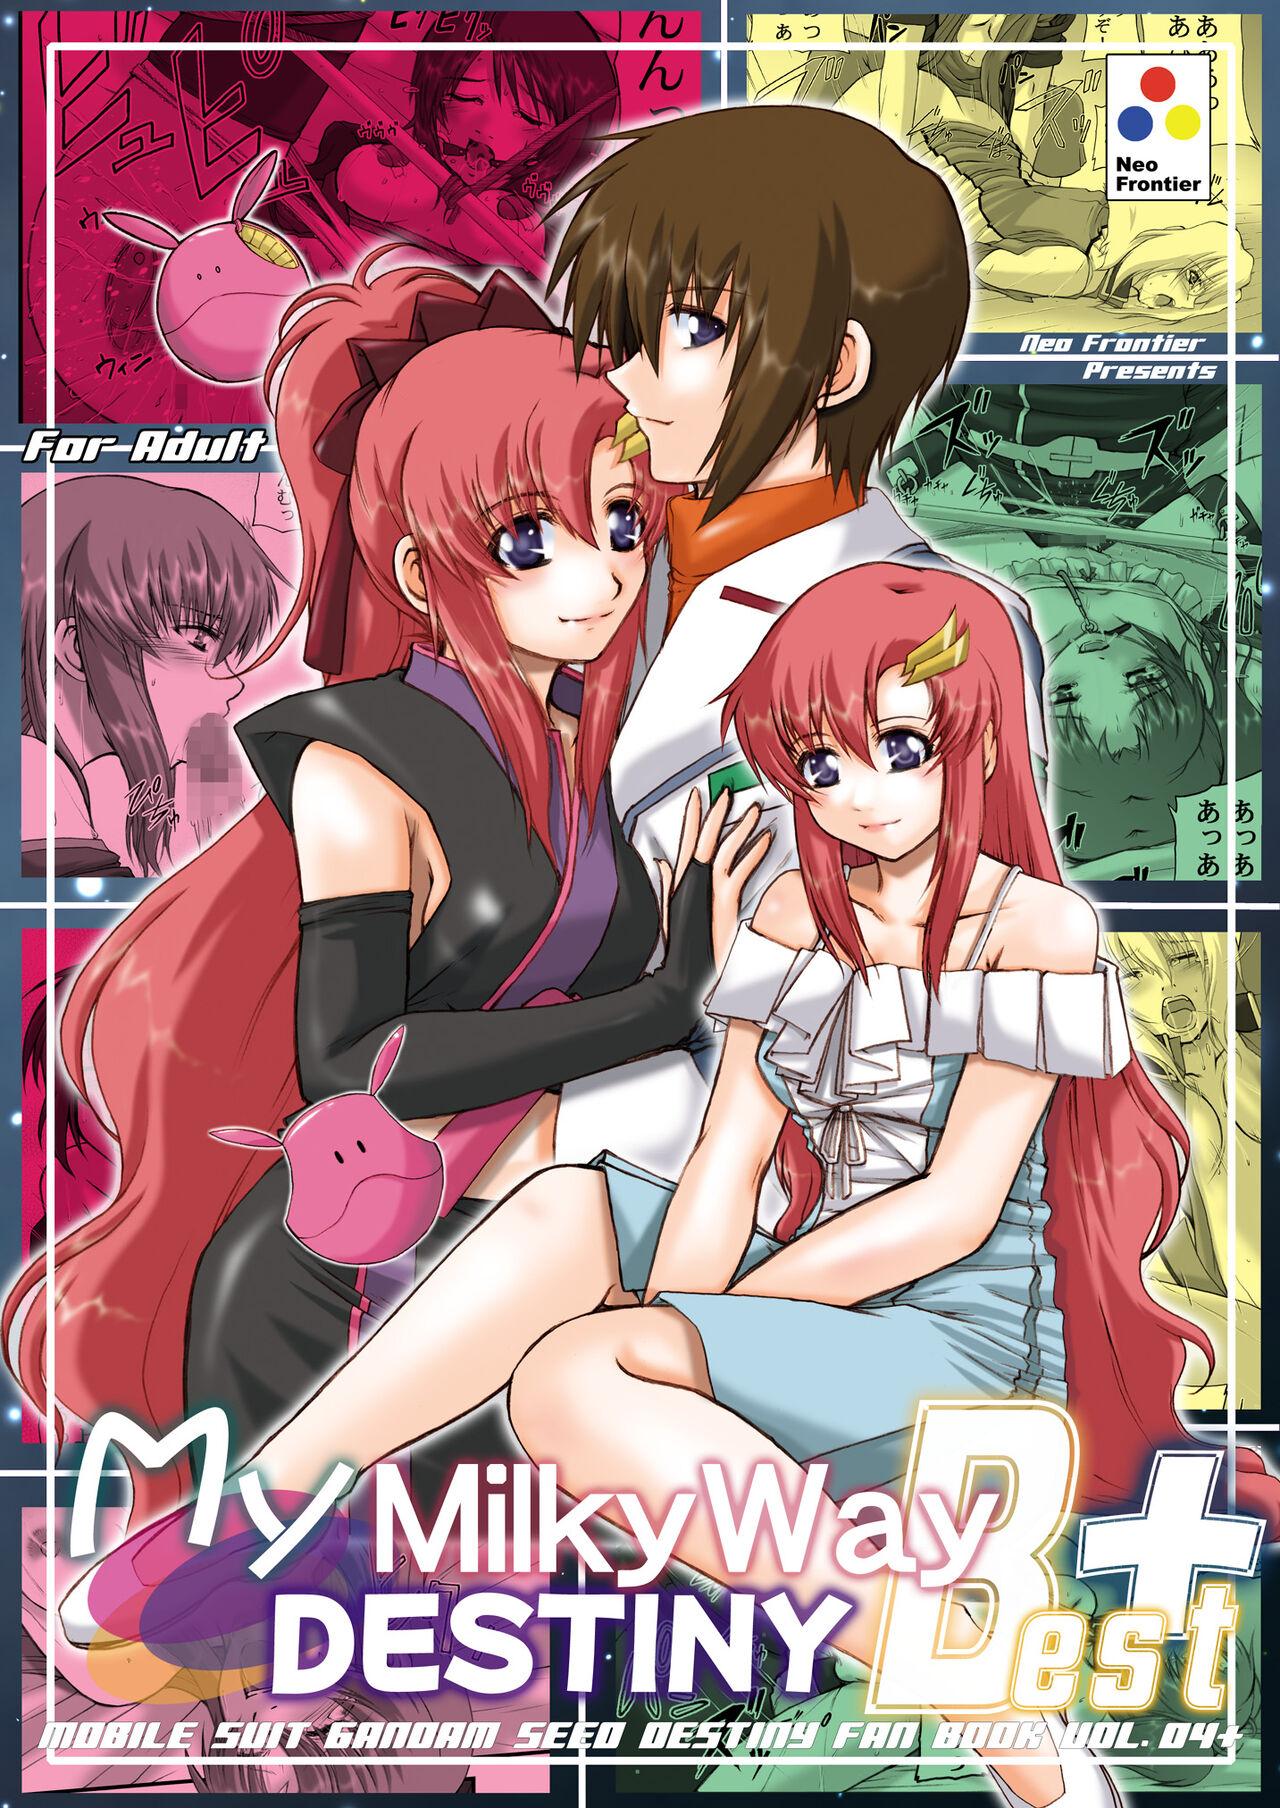 Tease My Milky Way DESTINY Best+ - Gundam seed Sesso - Picture 1